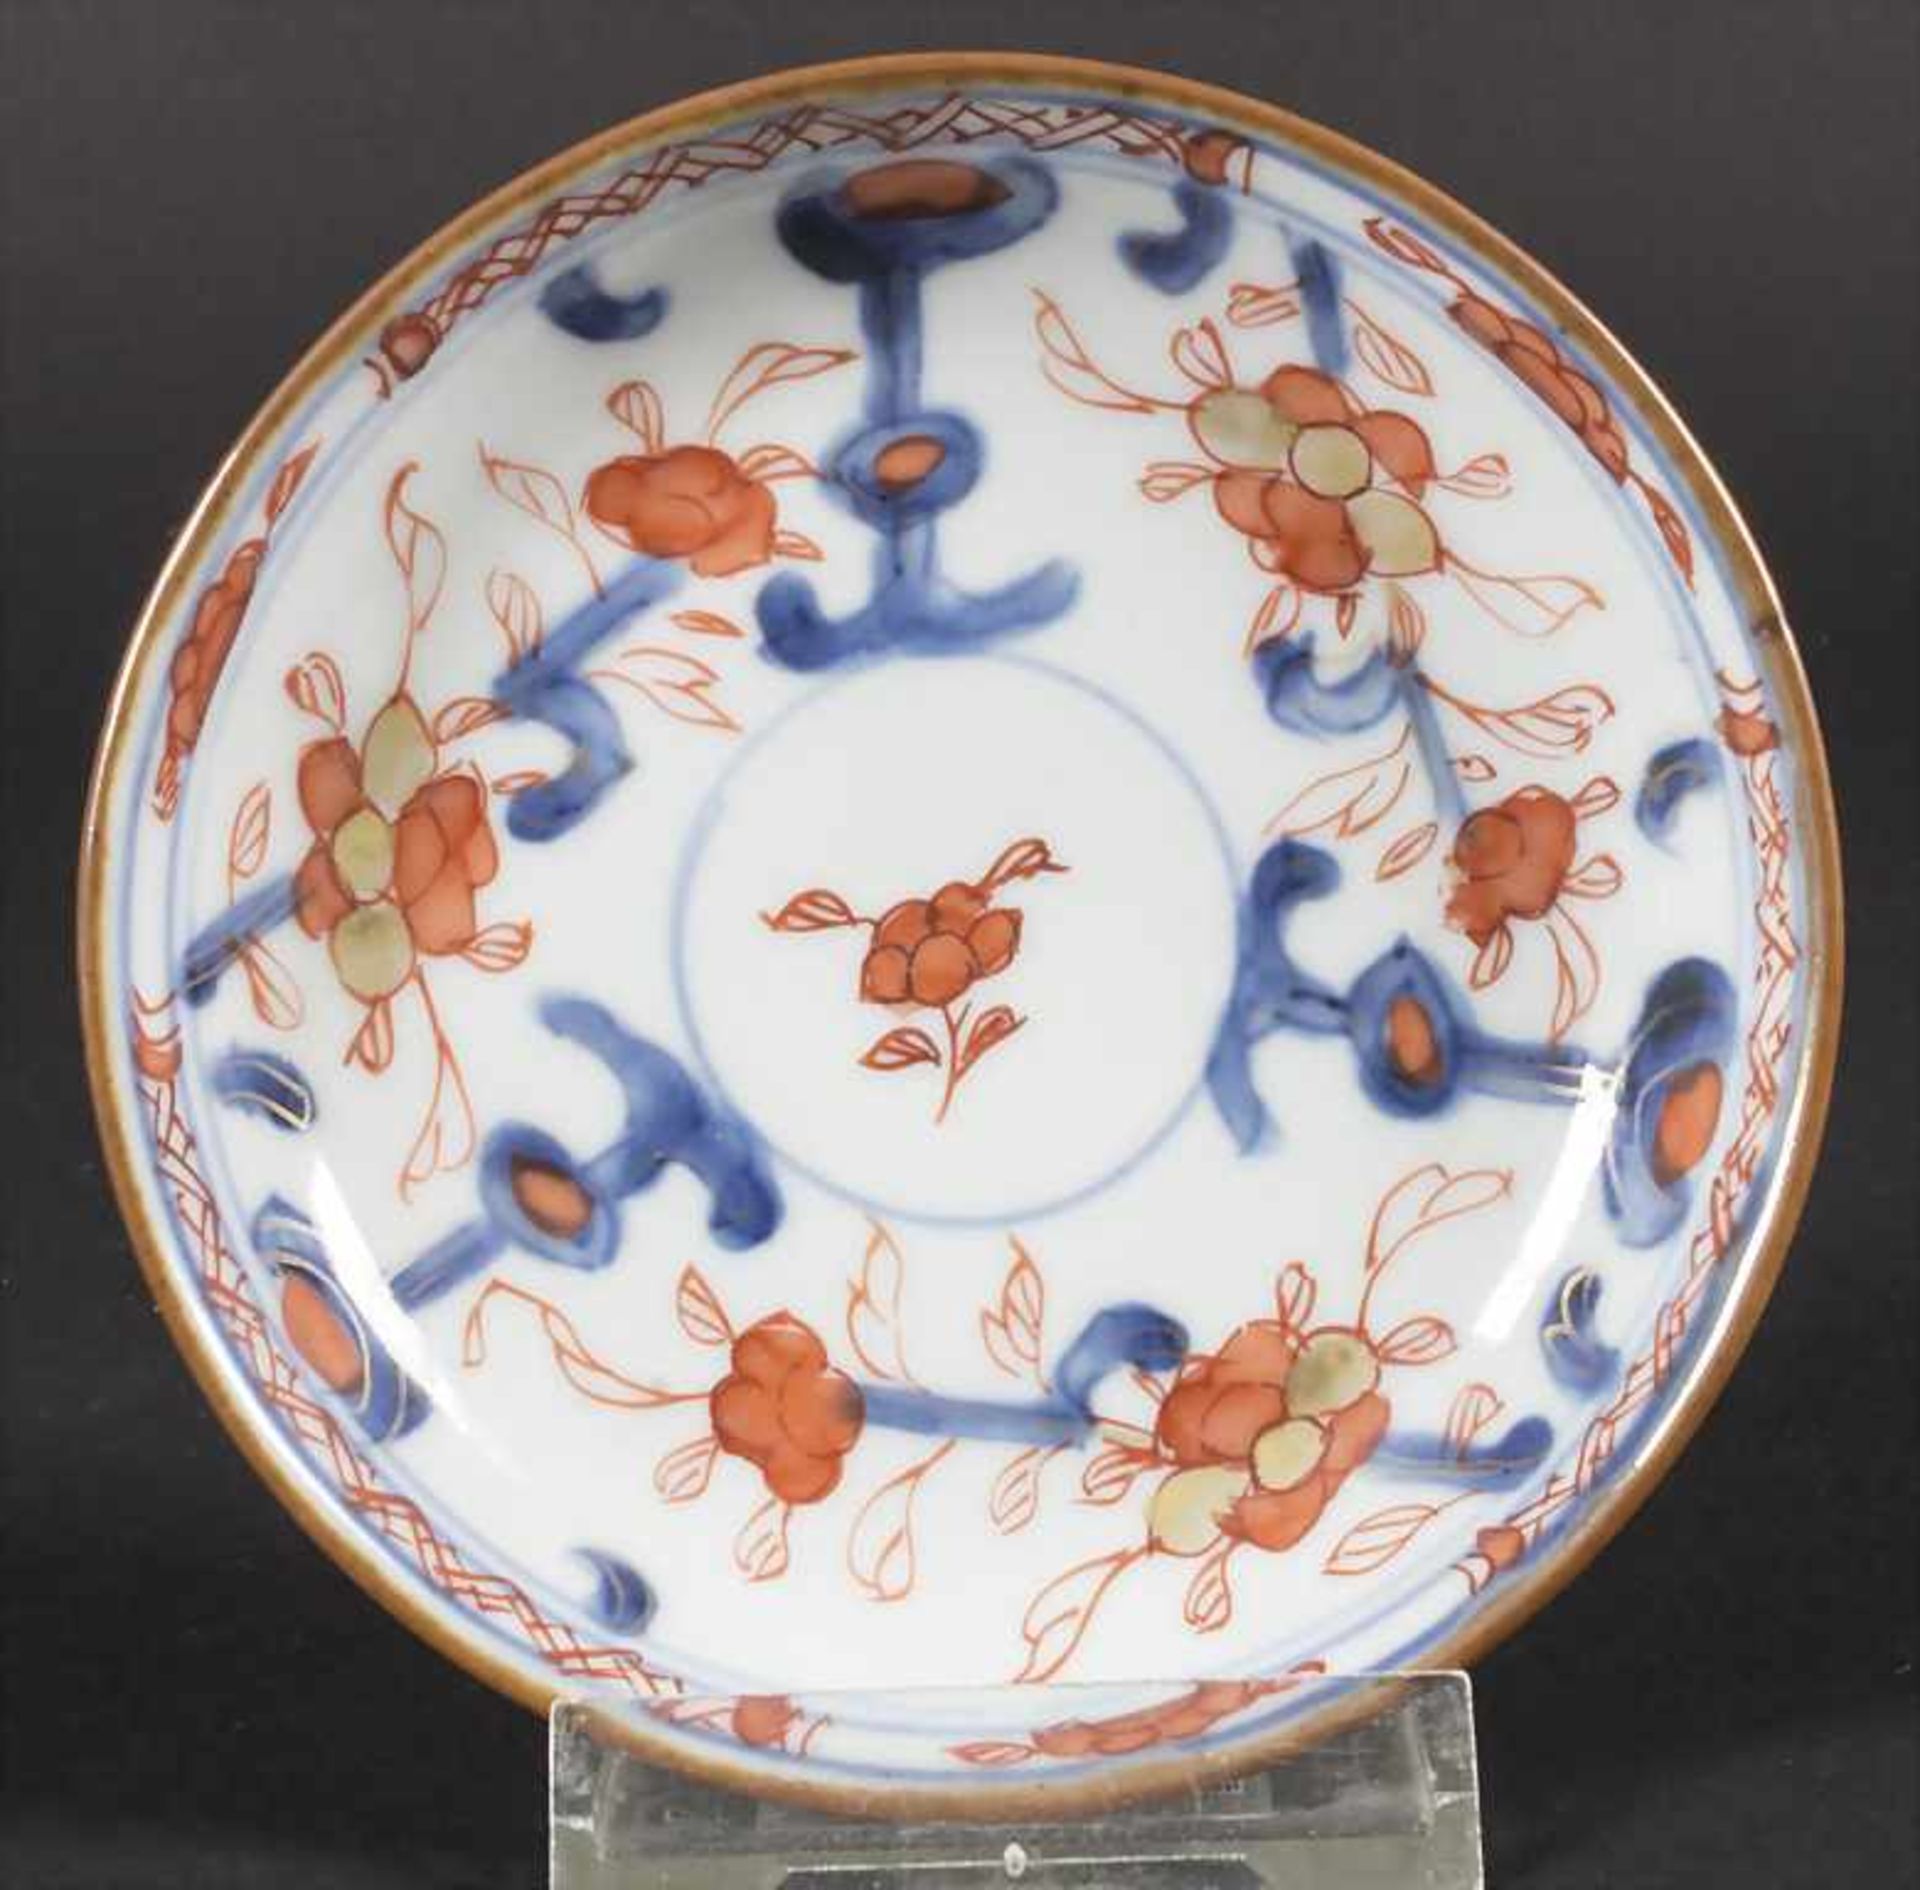 Kumme mit Unterteller / A porcelain bowl with saucer, China, Qing-Dynastie (1644-1911), wohl 18. - Image 2 of 6